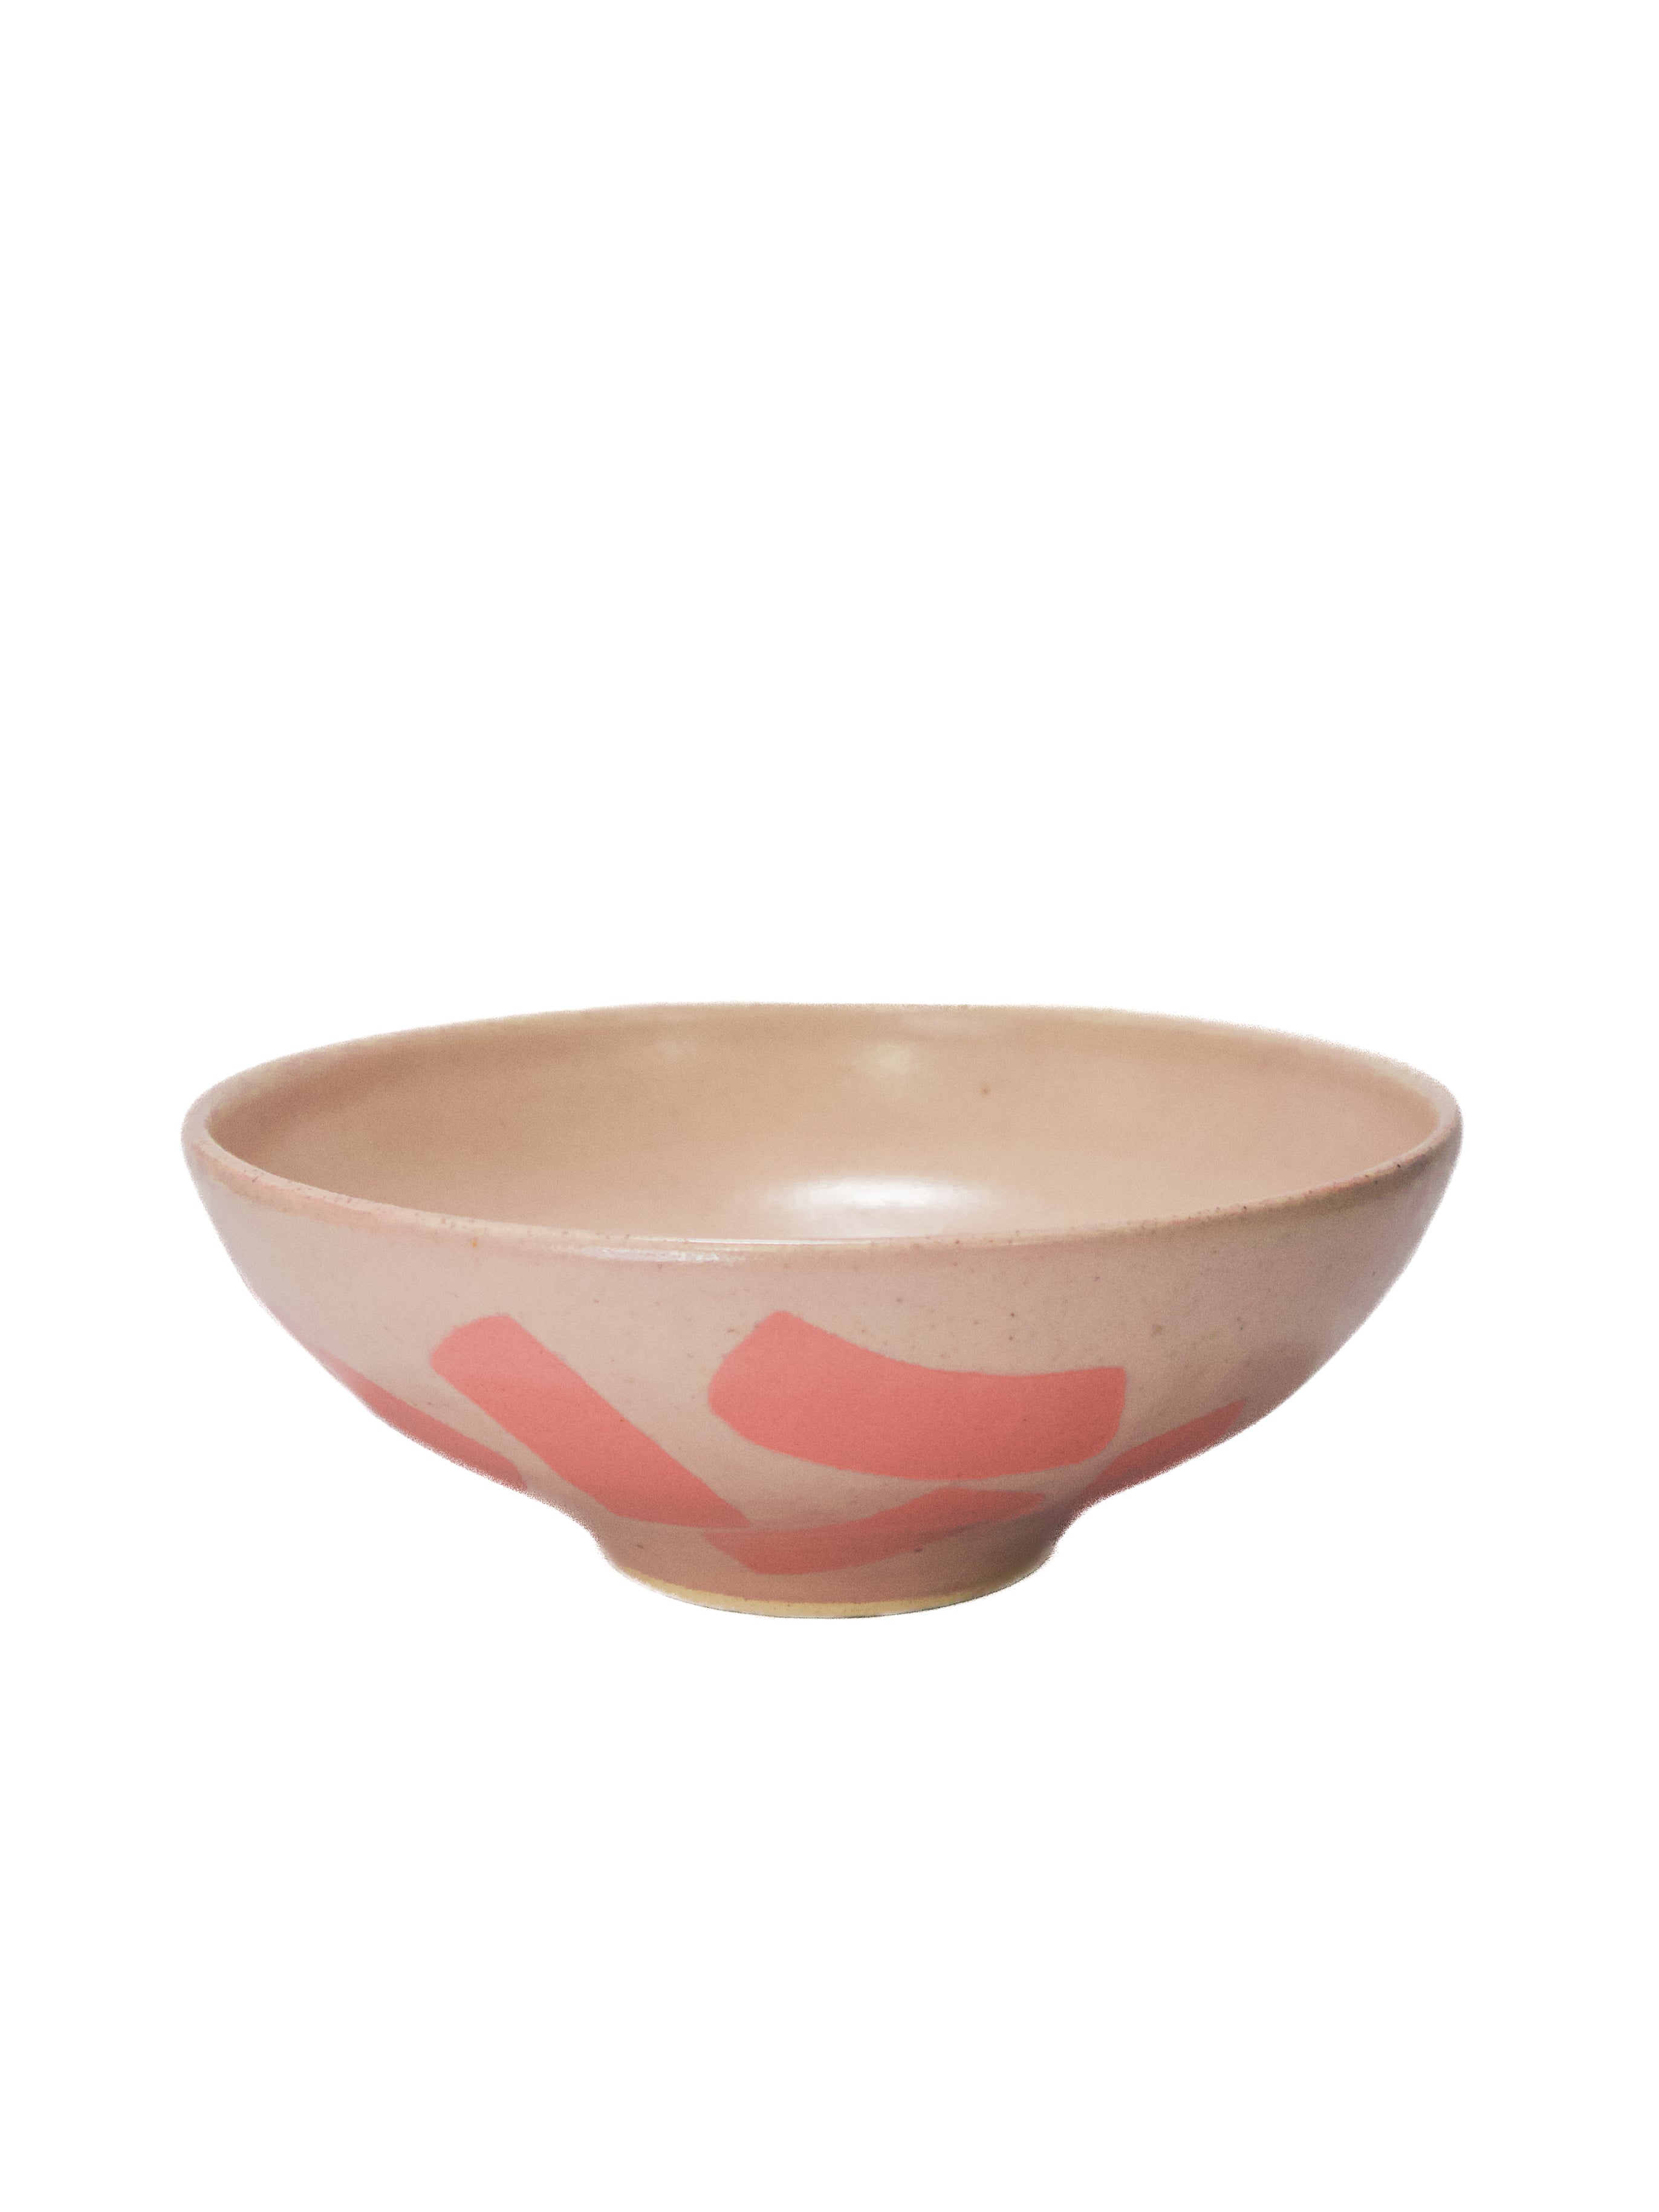 Beginner Ceramics Summer Peach Bowl with Soft Pink Shapes